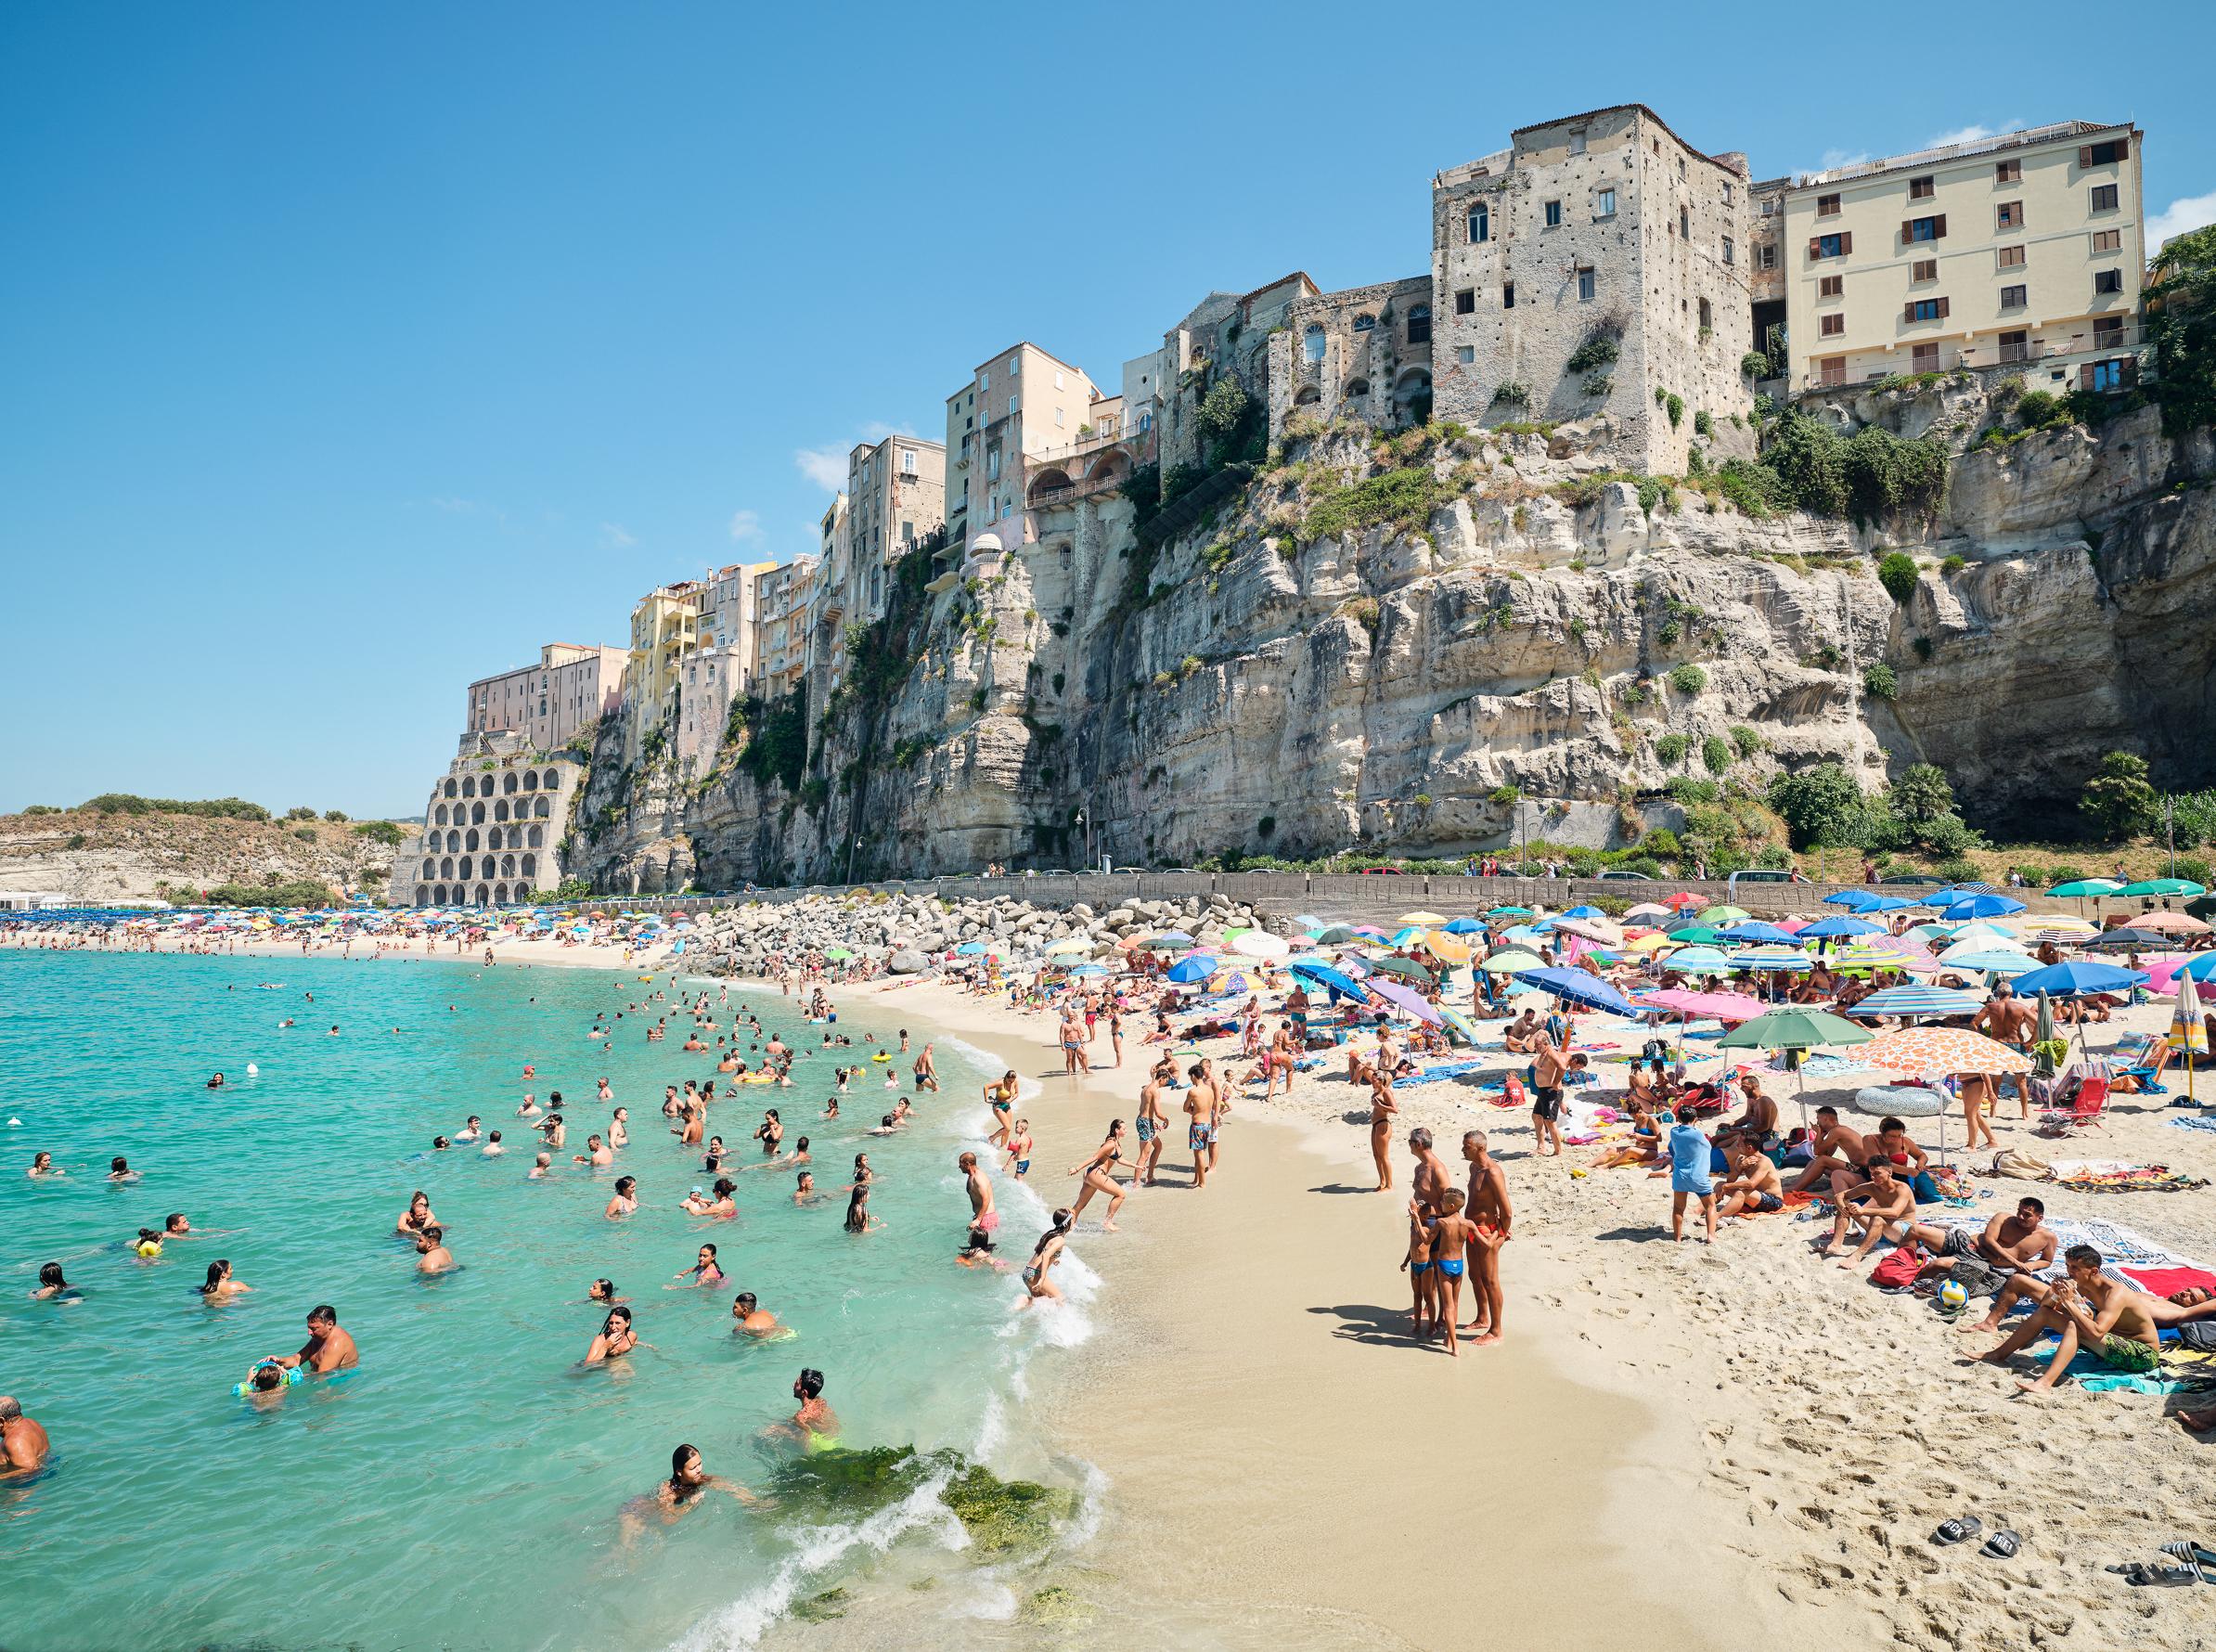 Troy House - Tropea #2, Photography 2021, Printed After